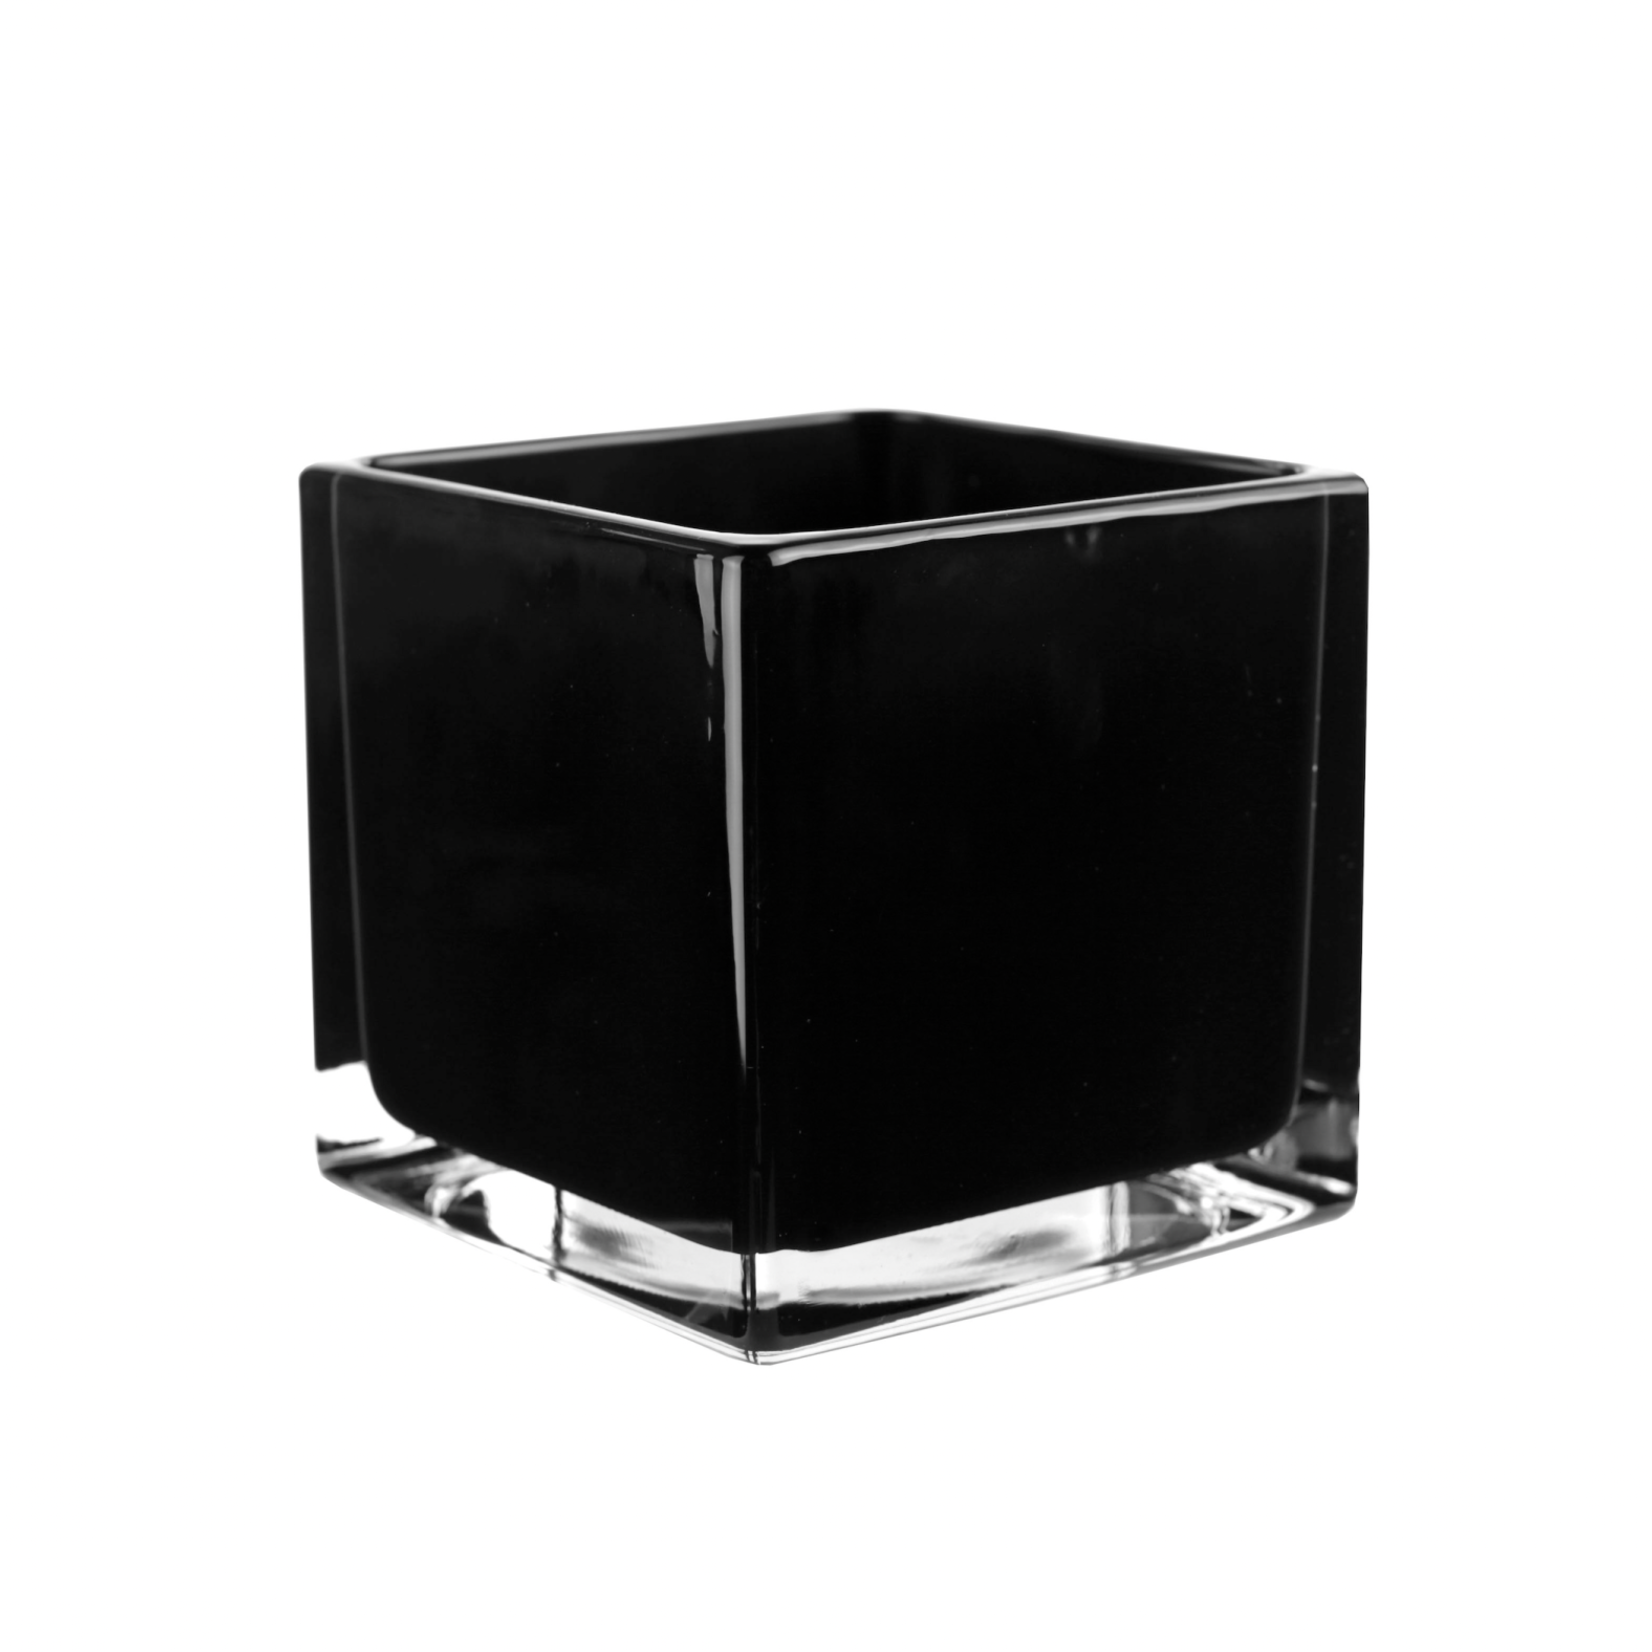 5"H X 5" X 5" BLACK GLASS SQUARE VASE CUBE, CAN ALSO BE USED AS A VOTIVE